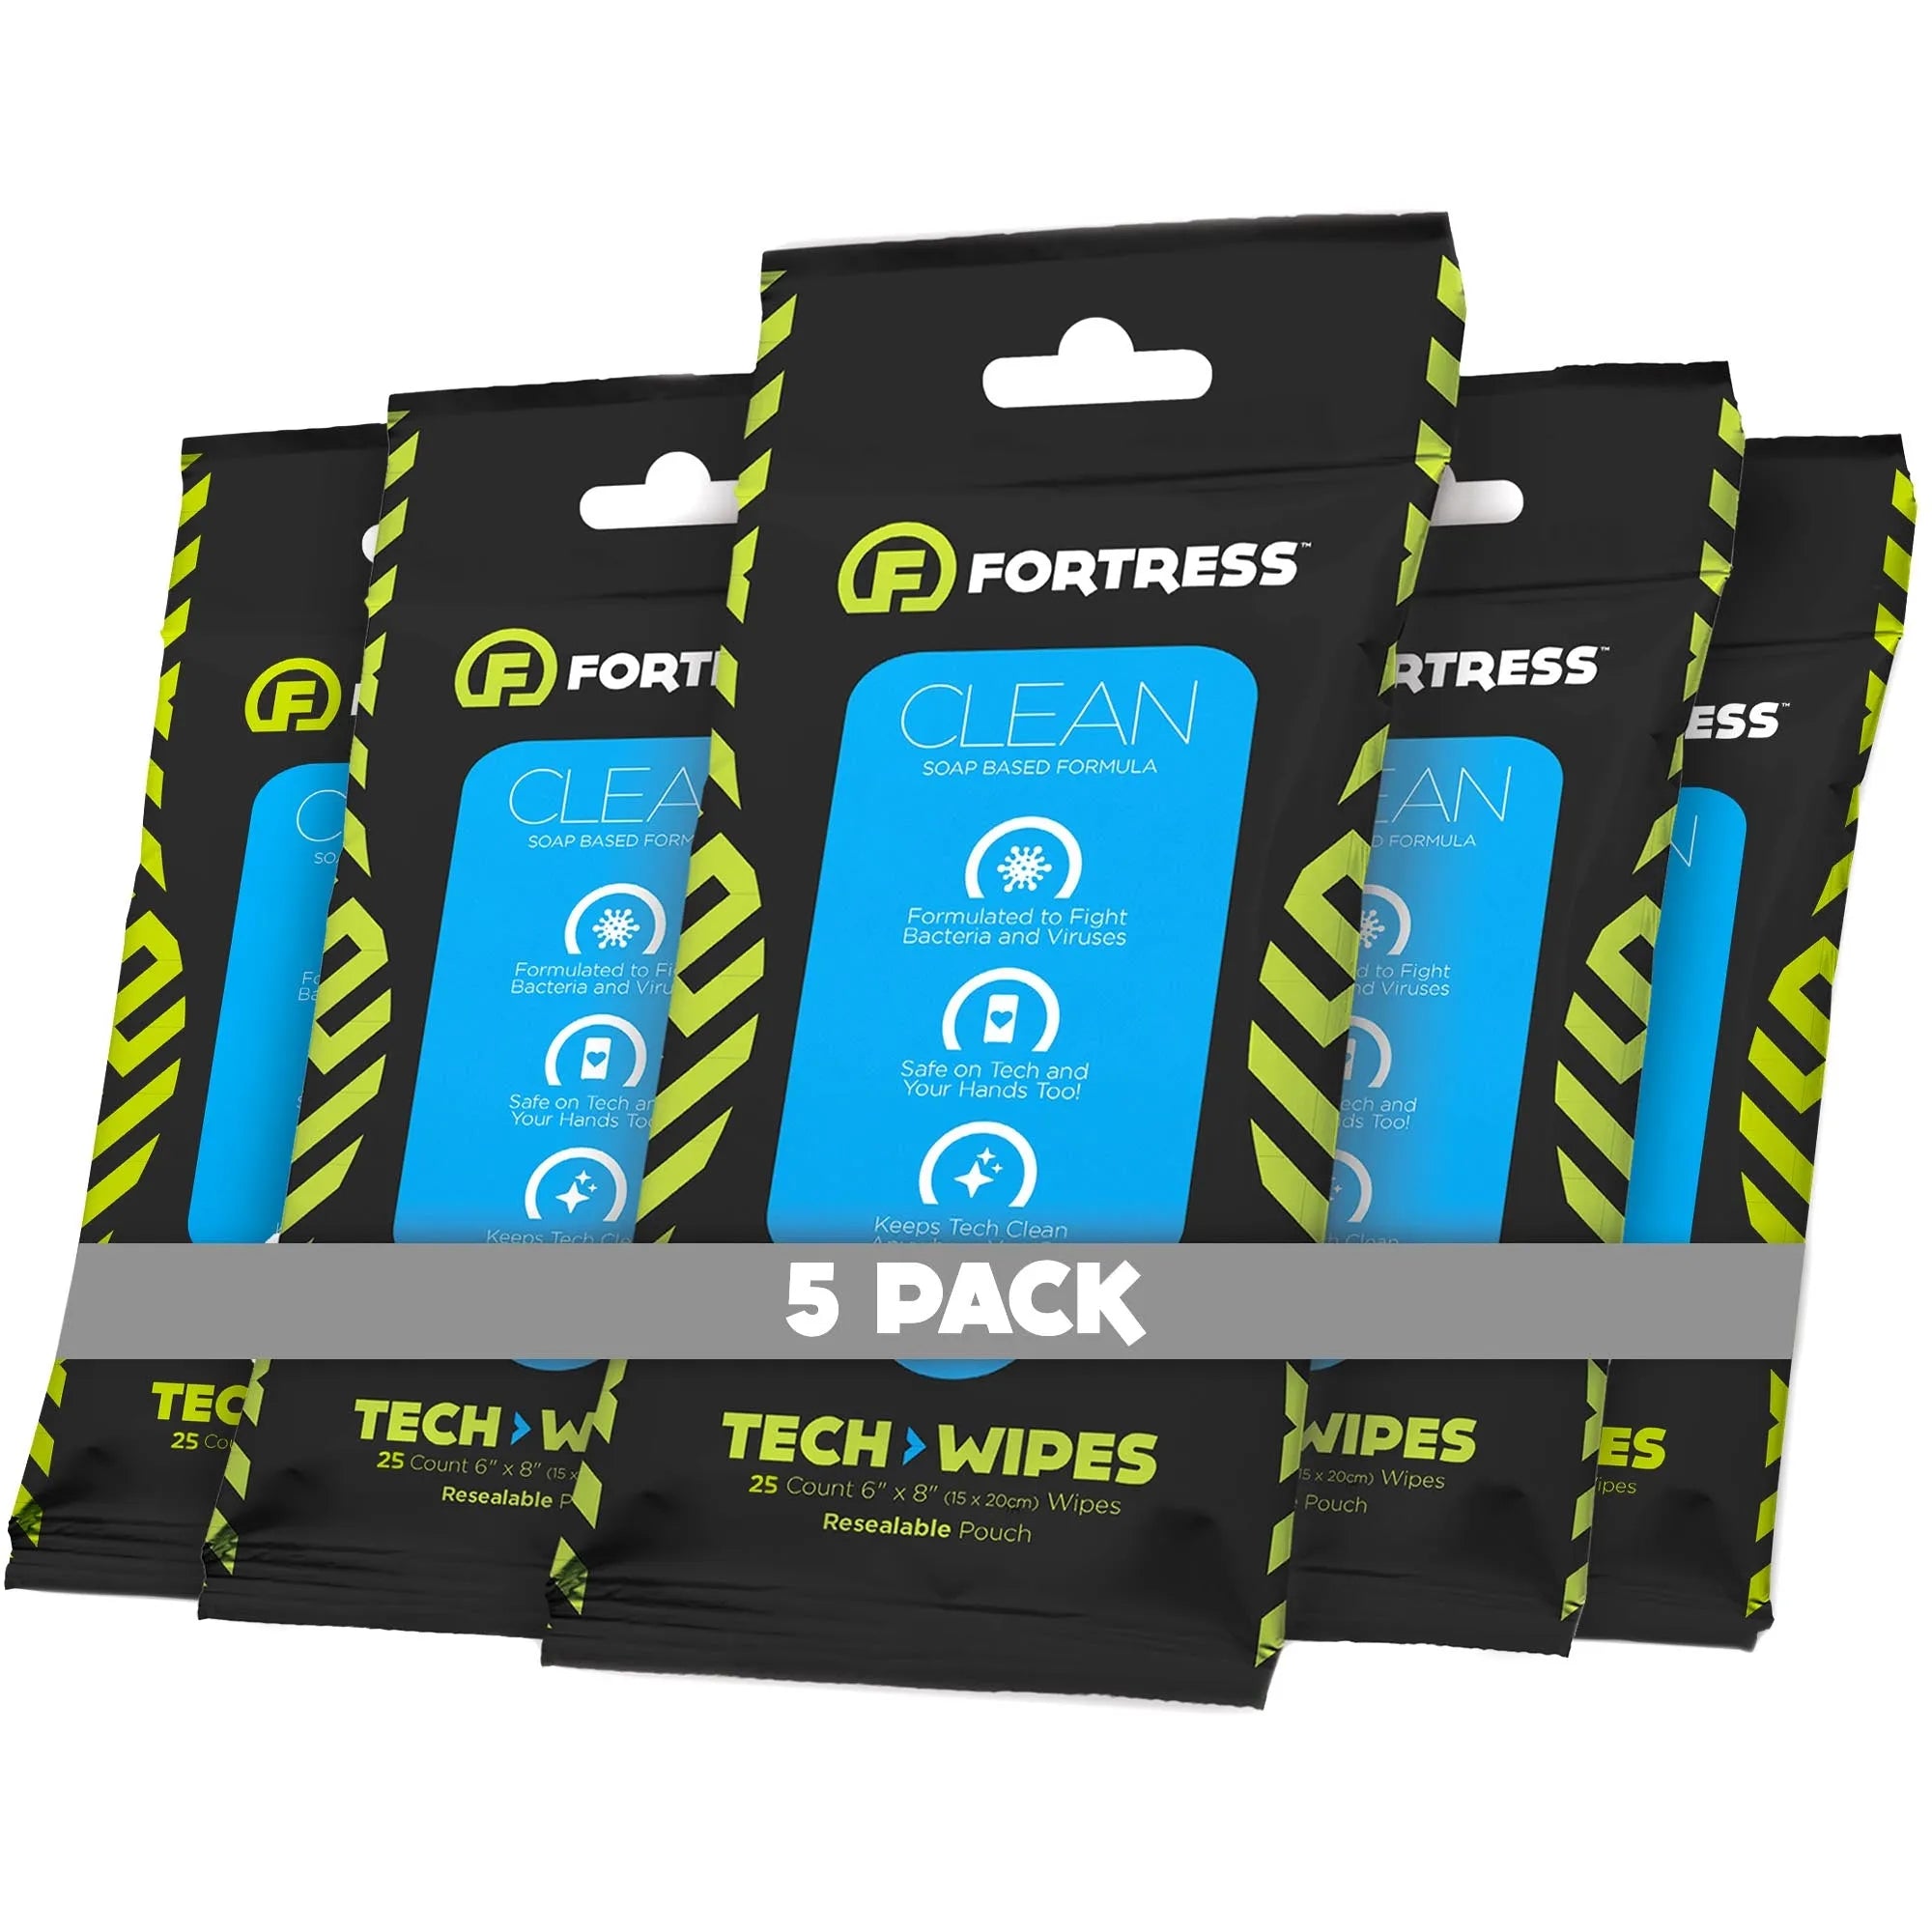 Fortress Tech Wipes (25 ct.) To-Go Disinfecting Wipes for Smartphones 5-PackYes Scooch Clean